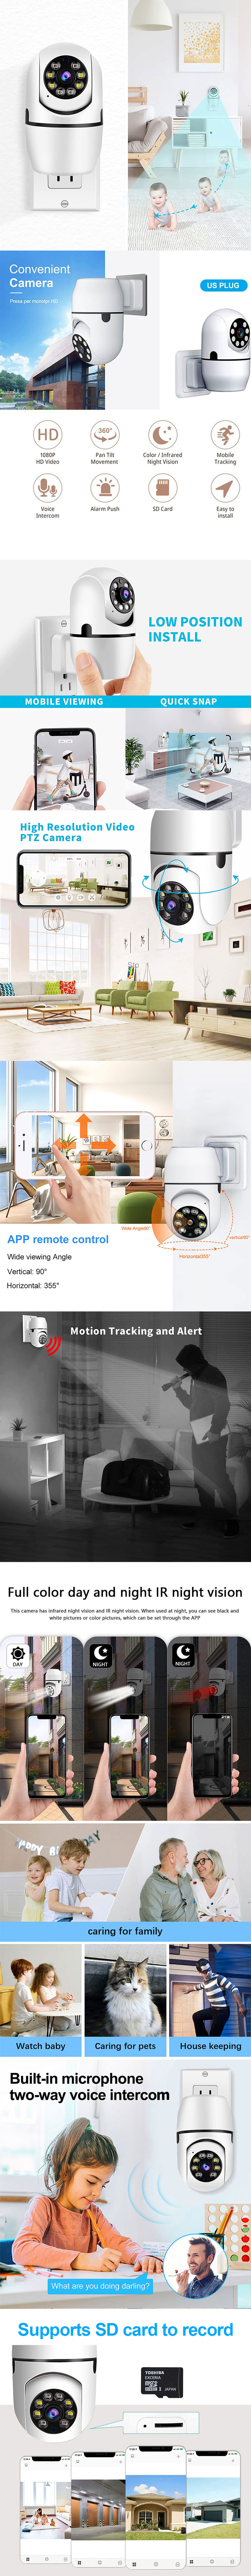 A11-1080P-HD-Security-Camera-Wireless-Plug-In-PTZ-Monitoring-Surveillance-Cam-IR-Night-Vision-Mobile-1976086-1